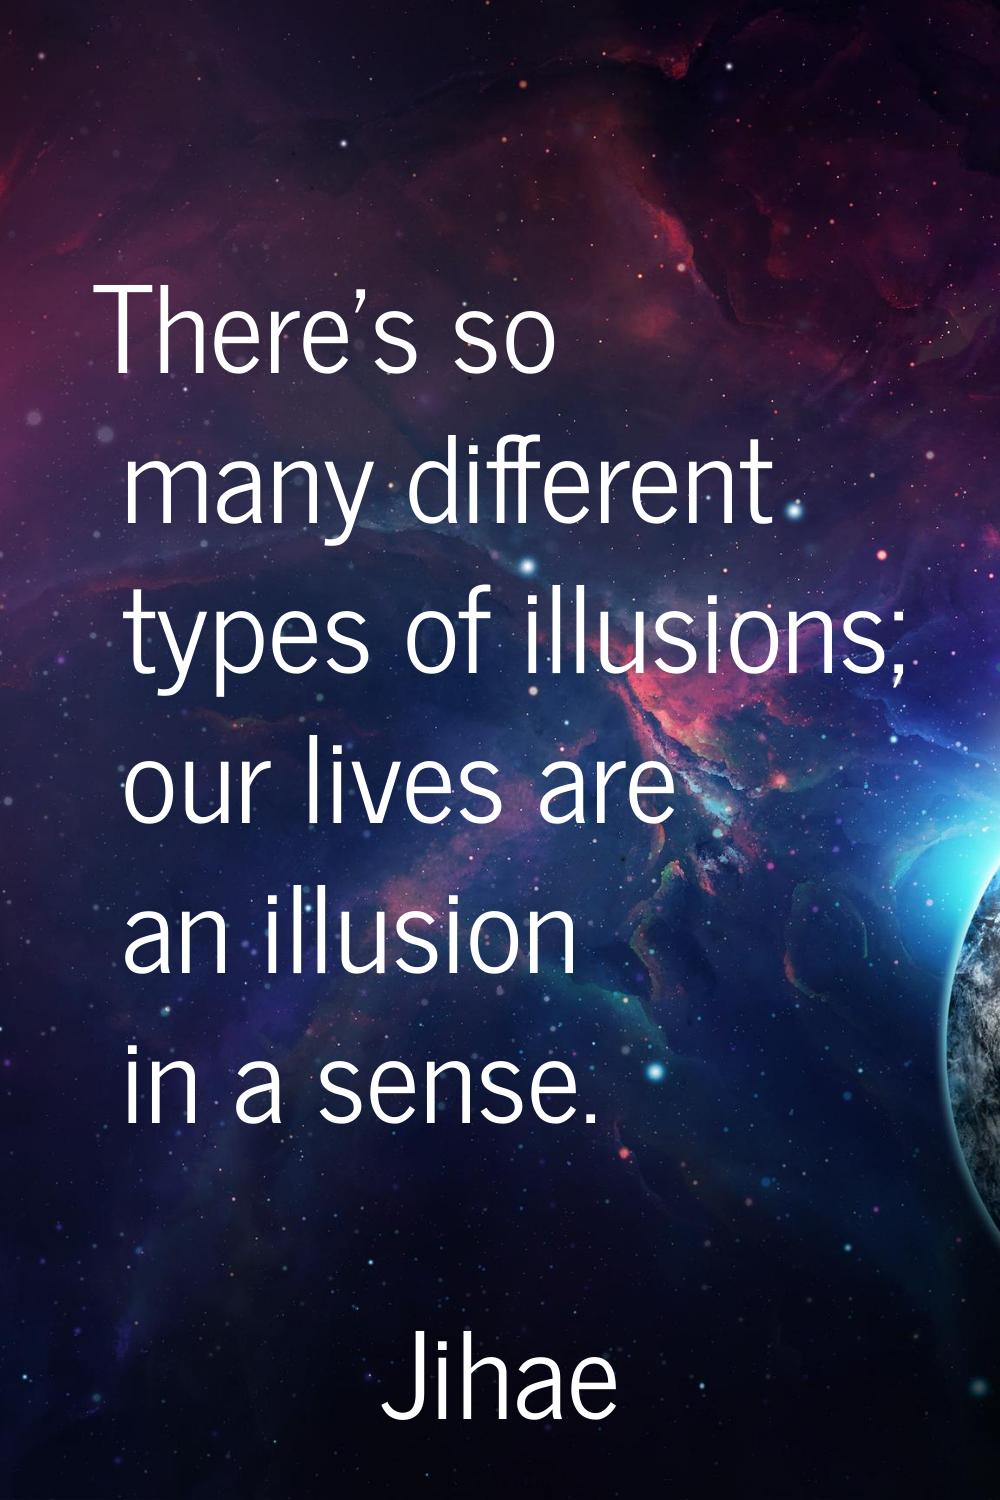 There's so many different types of illusions; our lives are an illusion in a sense.